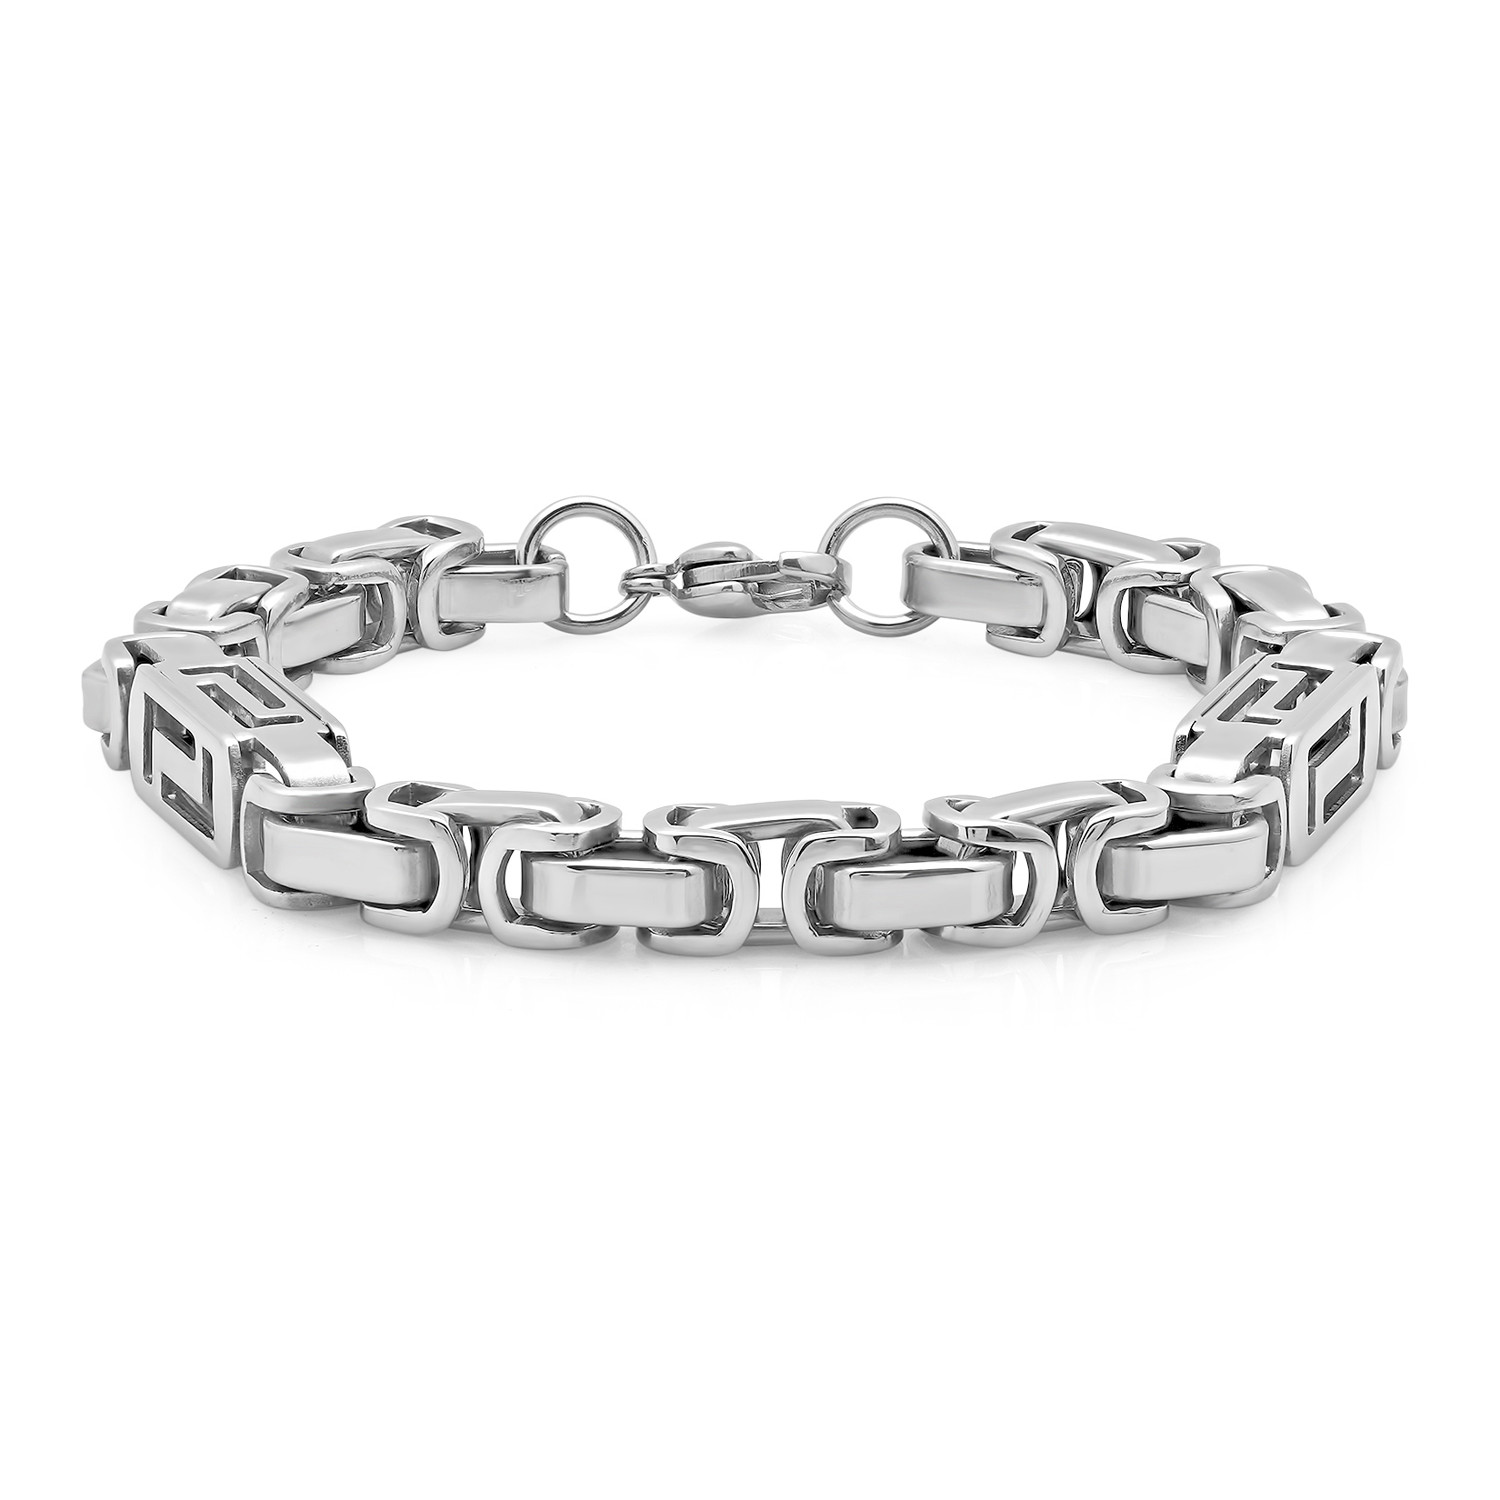 Mechanic Style Chain Bracelet with Rectangular Accents - HMY Jewelry ...